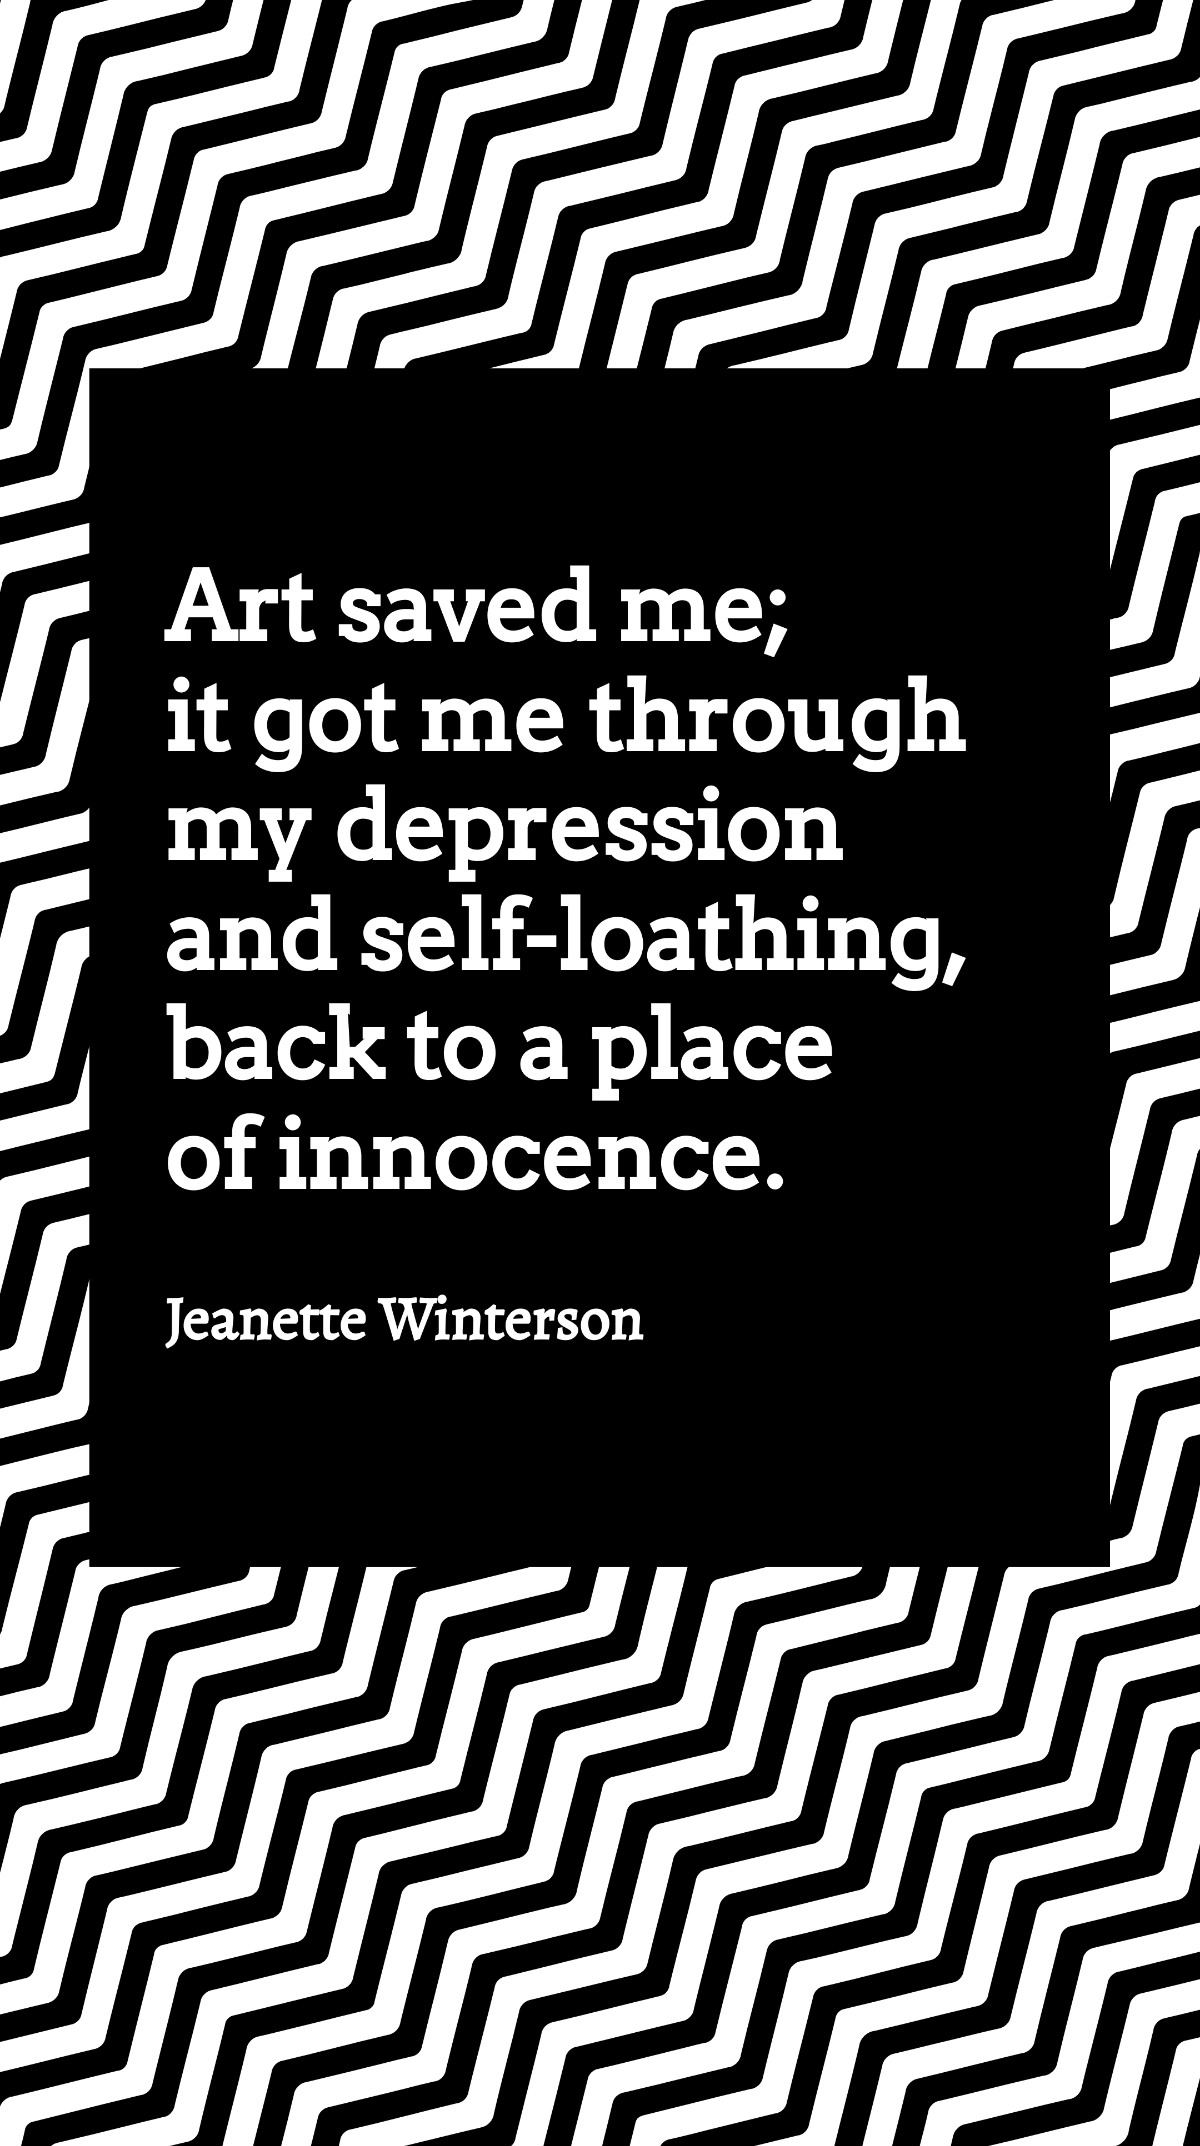 Jeanette Winterson - Art saved me; it got me through my depression and self-loathing, back to a place of innocence. Template